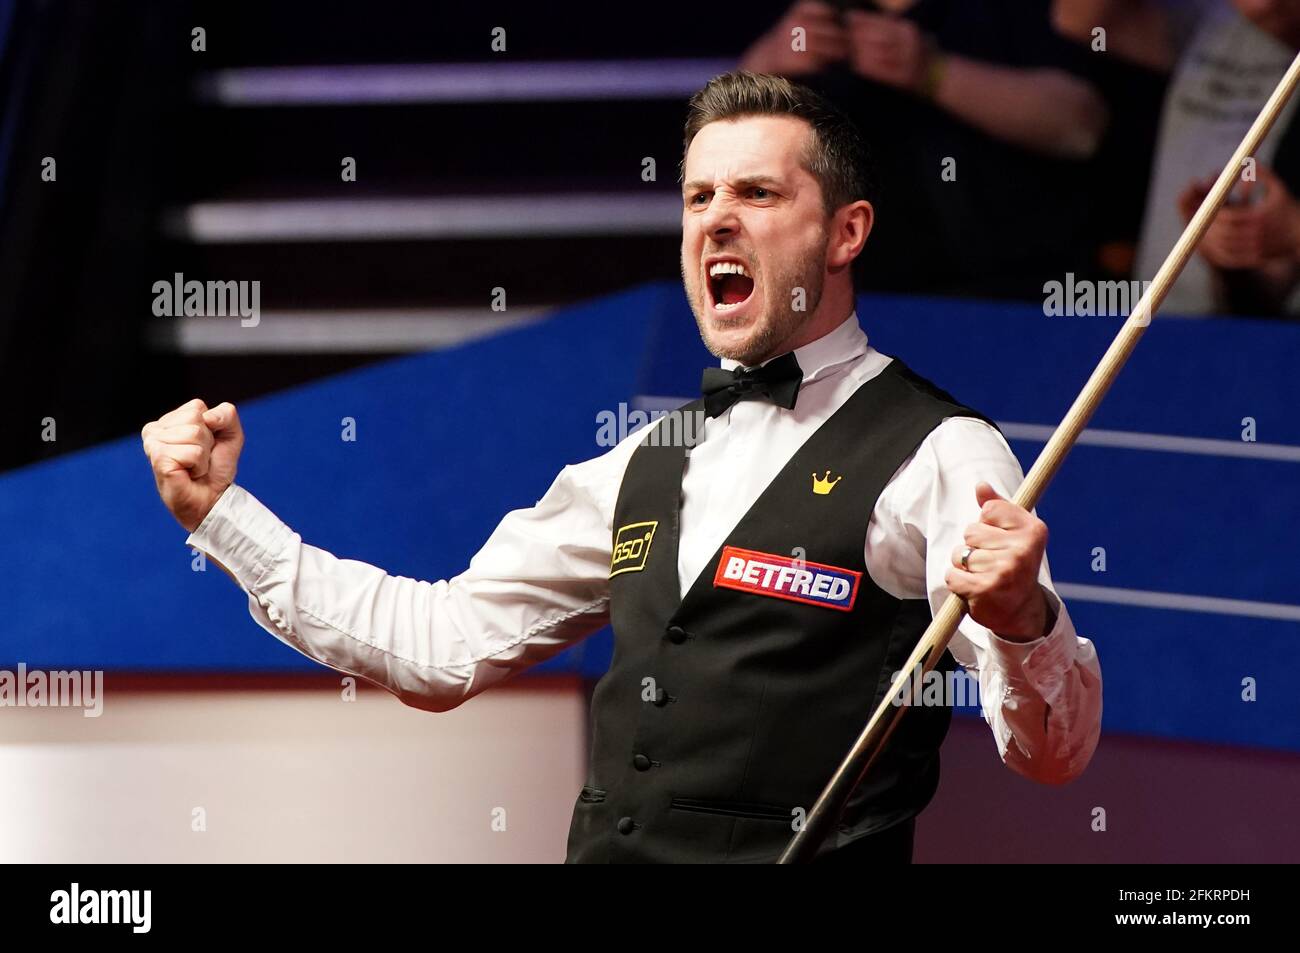 Englands Mark Selby celebrates after winning the the Betfred World Snooker Championships 2021 at The Crucible, Sheffield